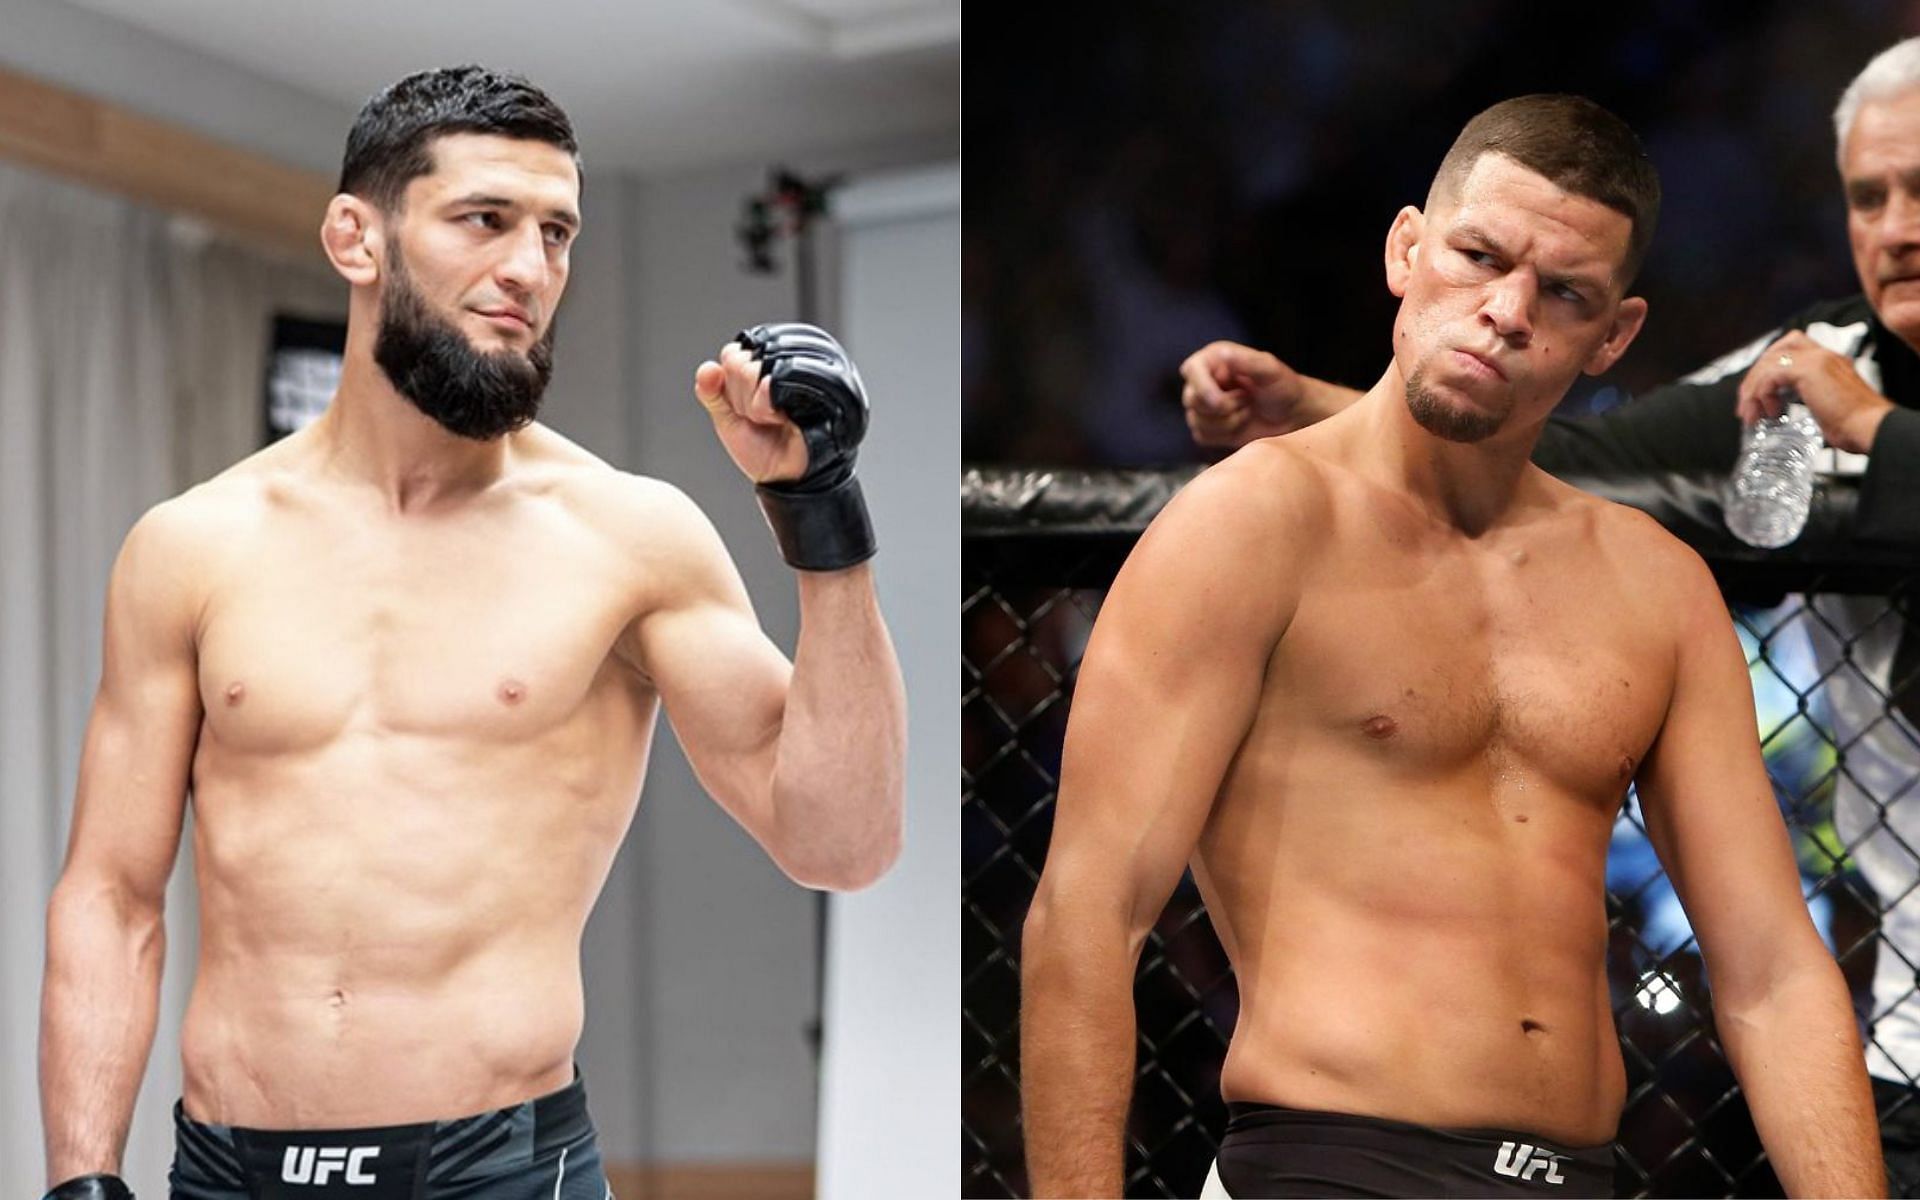 The UFC appears to be hoping to sacrifice Nate Diaz in order to build up Khamzat Chimaev as a star